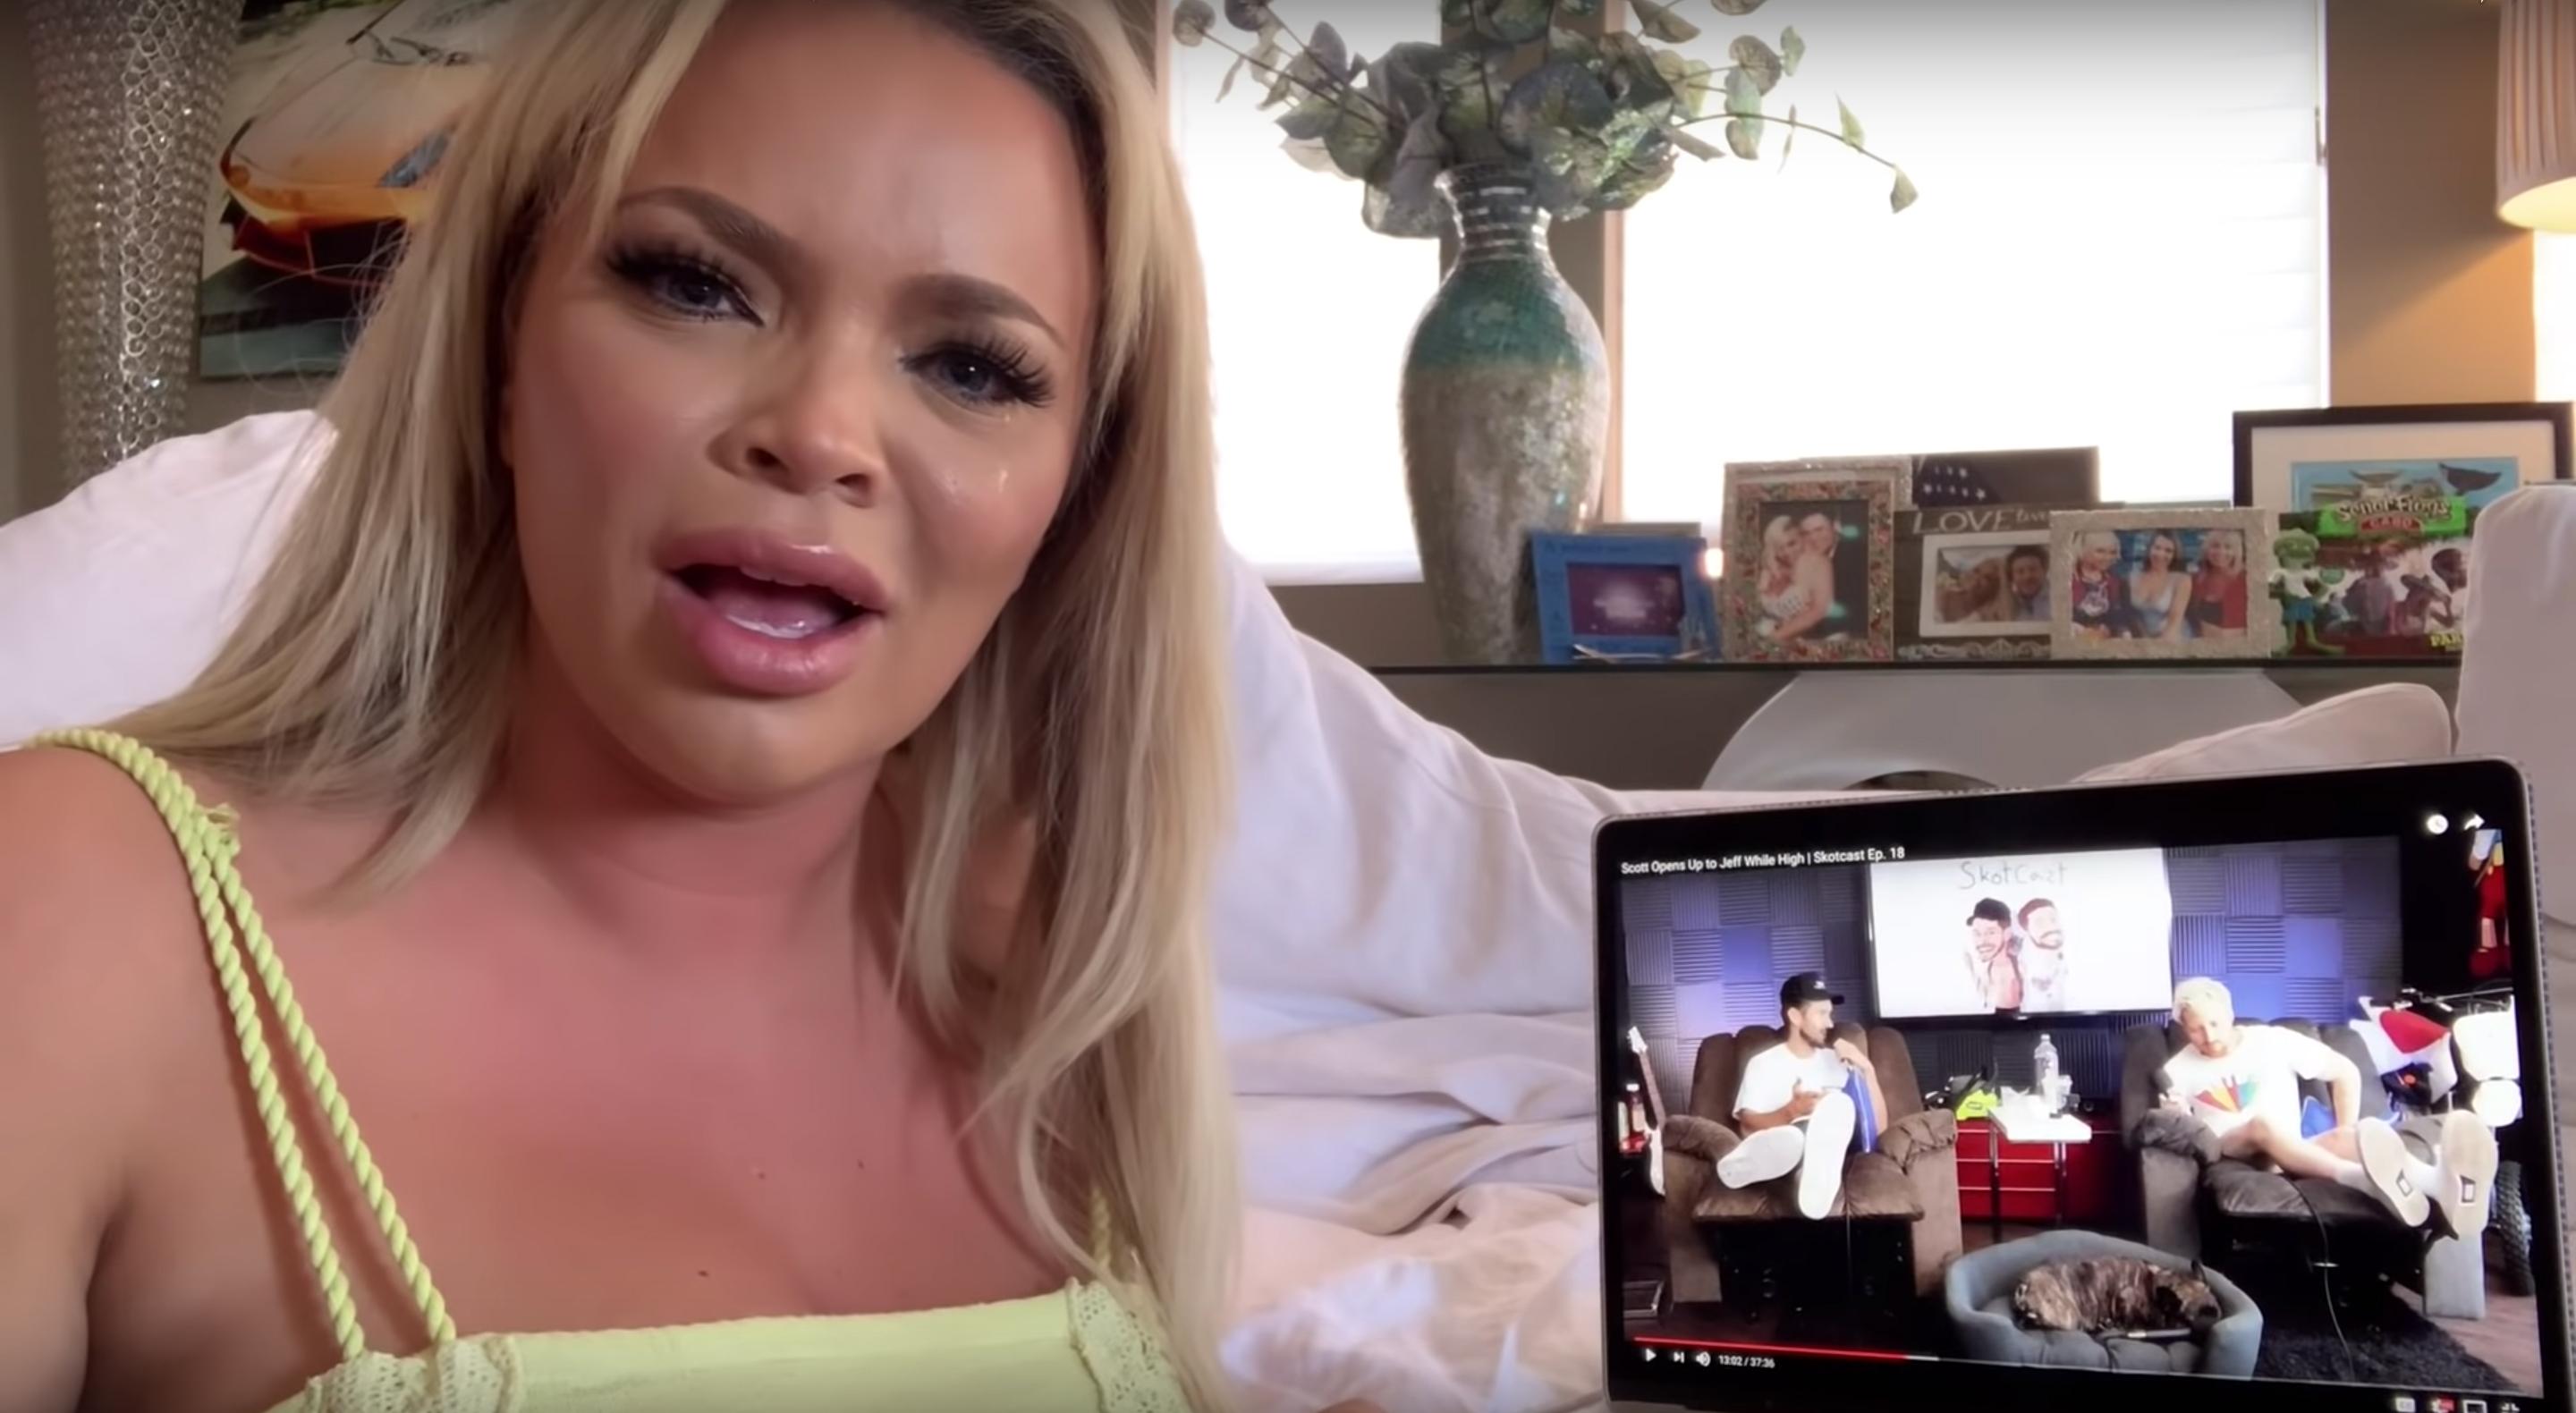 andrew pilling recommends trisha paytas at 18 pic